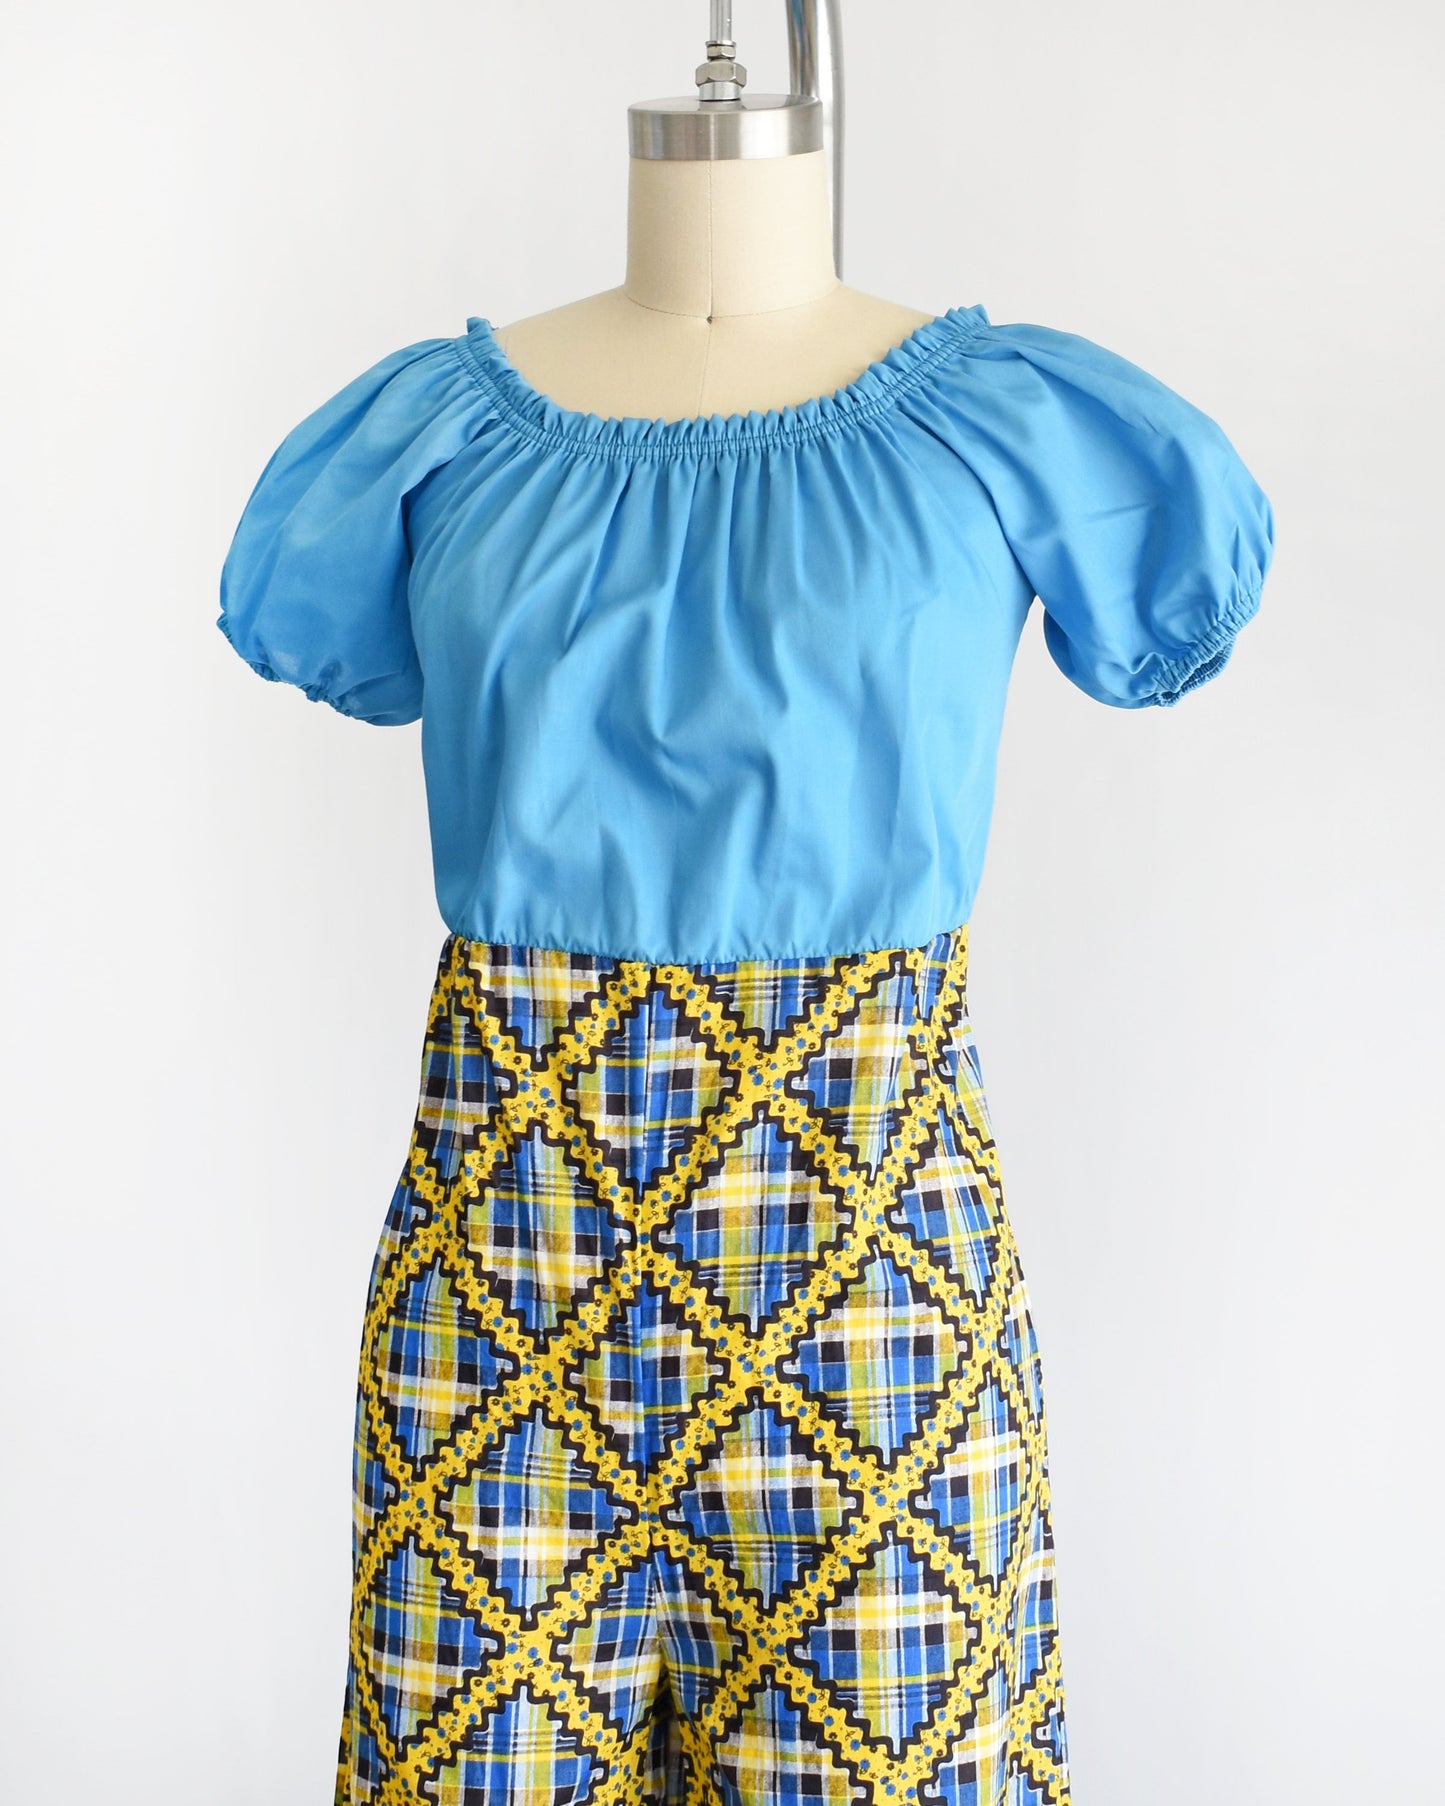 Side front view of a vintage 70s jumpsuit that has a blue bodice with smocked elastic neckline and puff sleeves. The pants are a blue, black, and yellow plaid, with a ric-rac dotted yellow and black print on top of the plaid.